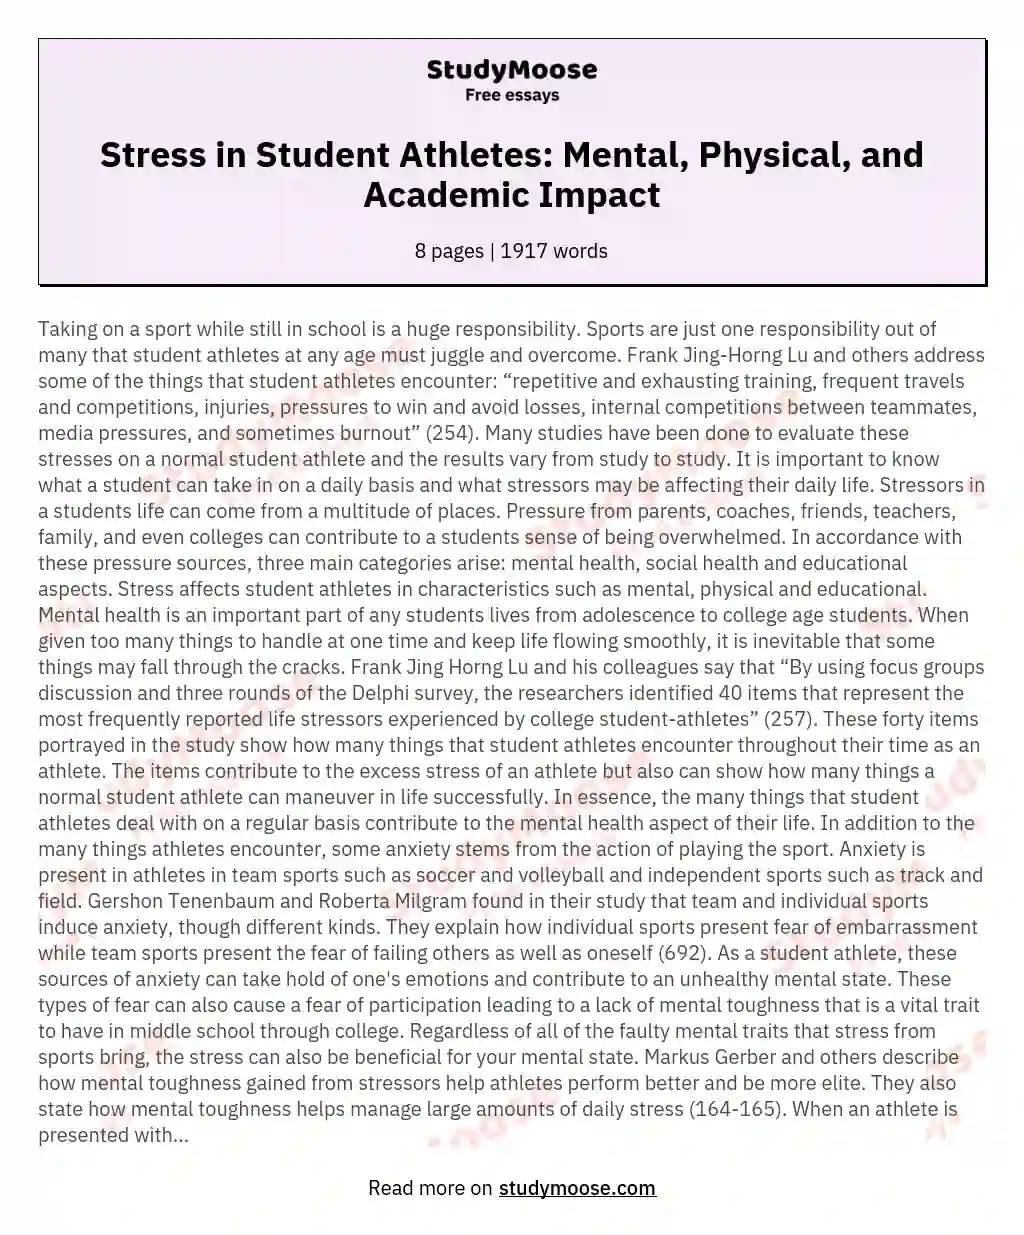 Stress in Student Athletes: Mental, Physical, and Academic Impact essay